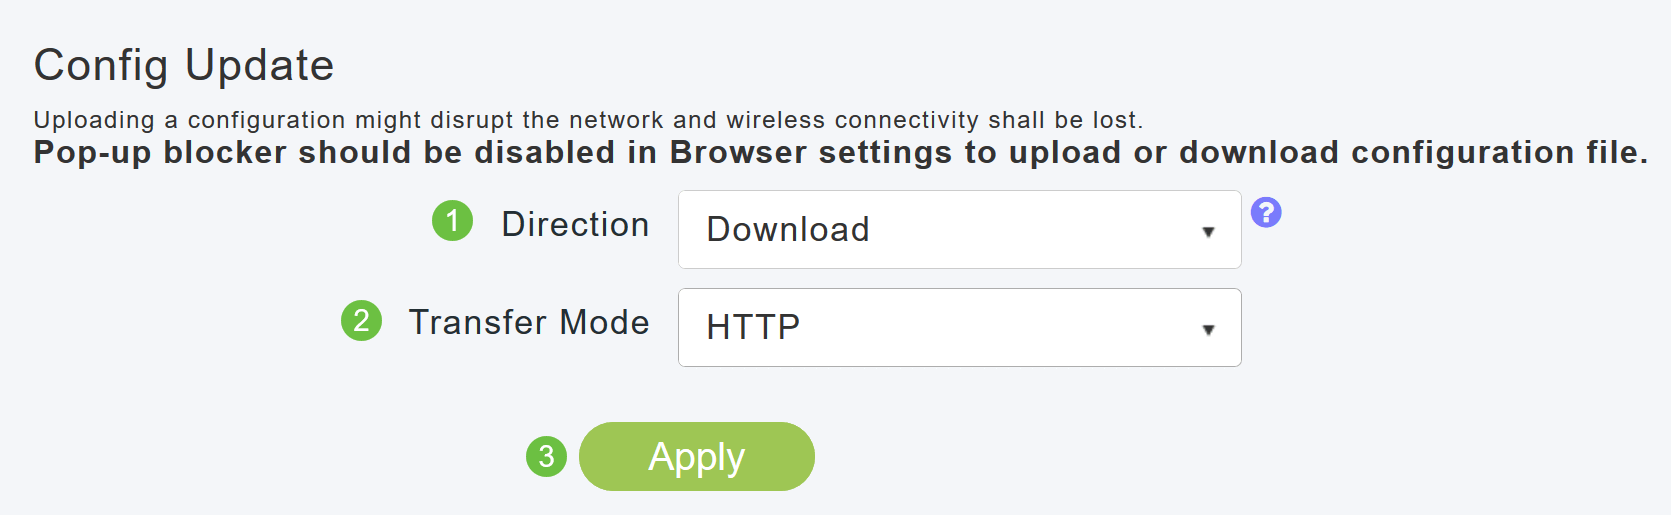 To download the configuration, in the Config Update section, set the Direction as Download and Transfer Mode as HTTP. Click Apply. 